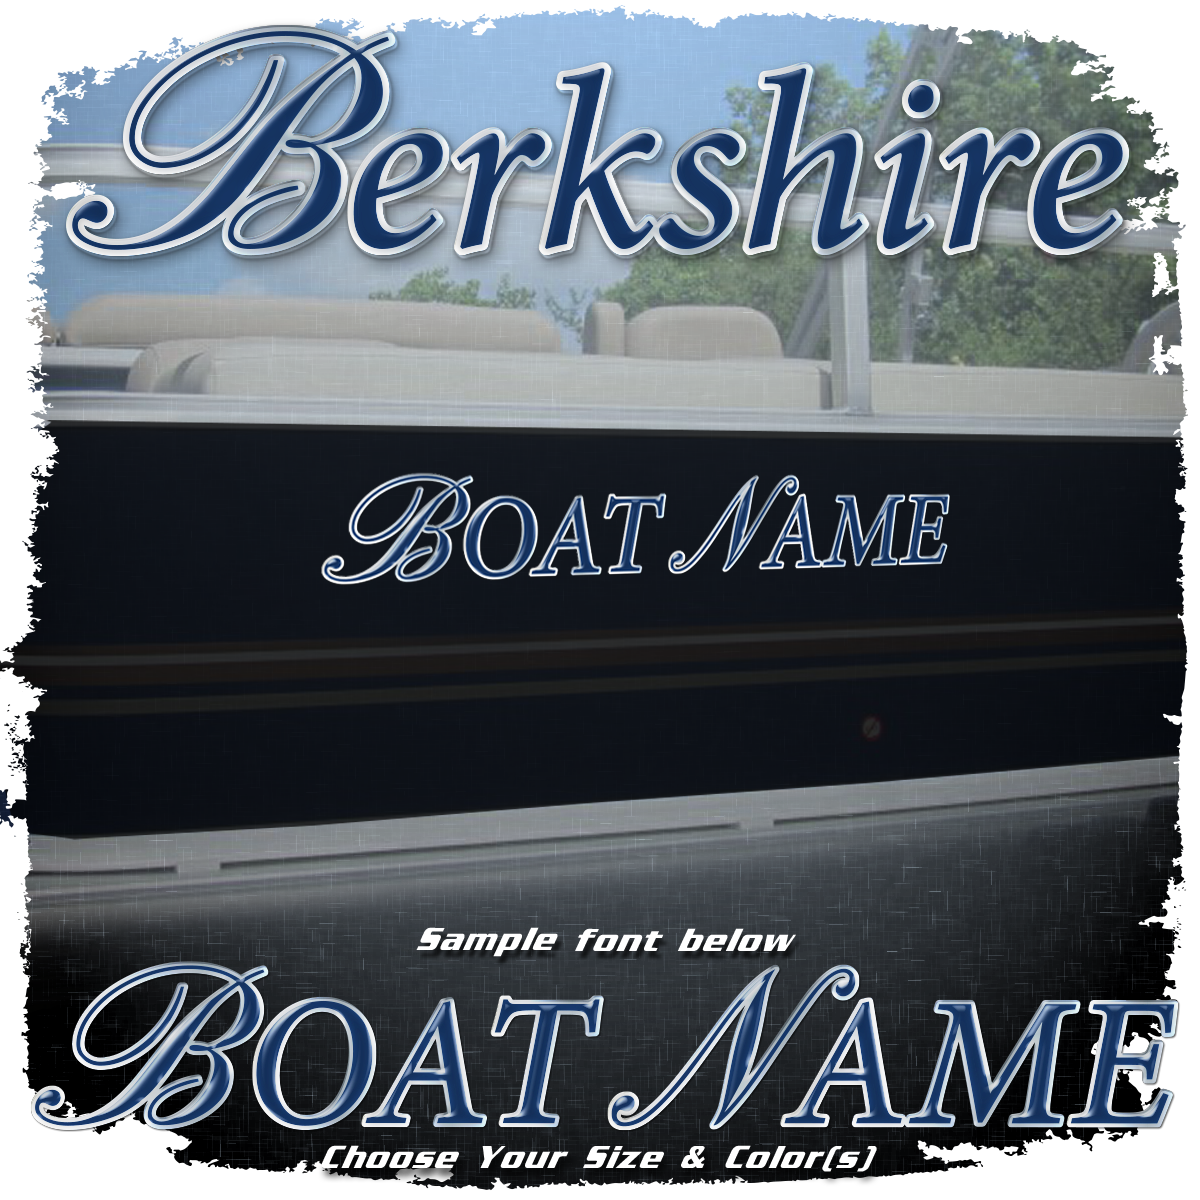 Domed Boat Name in the Berkshire Logo Style #1 Font, Choose Your Own Colors